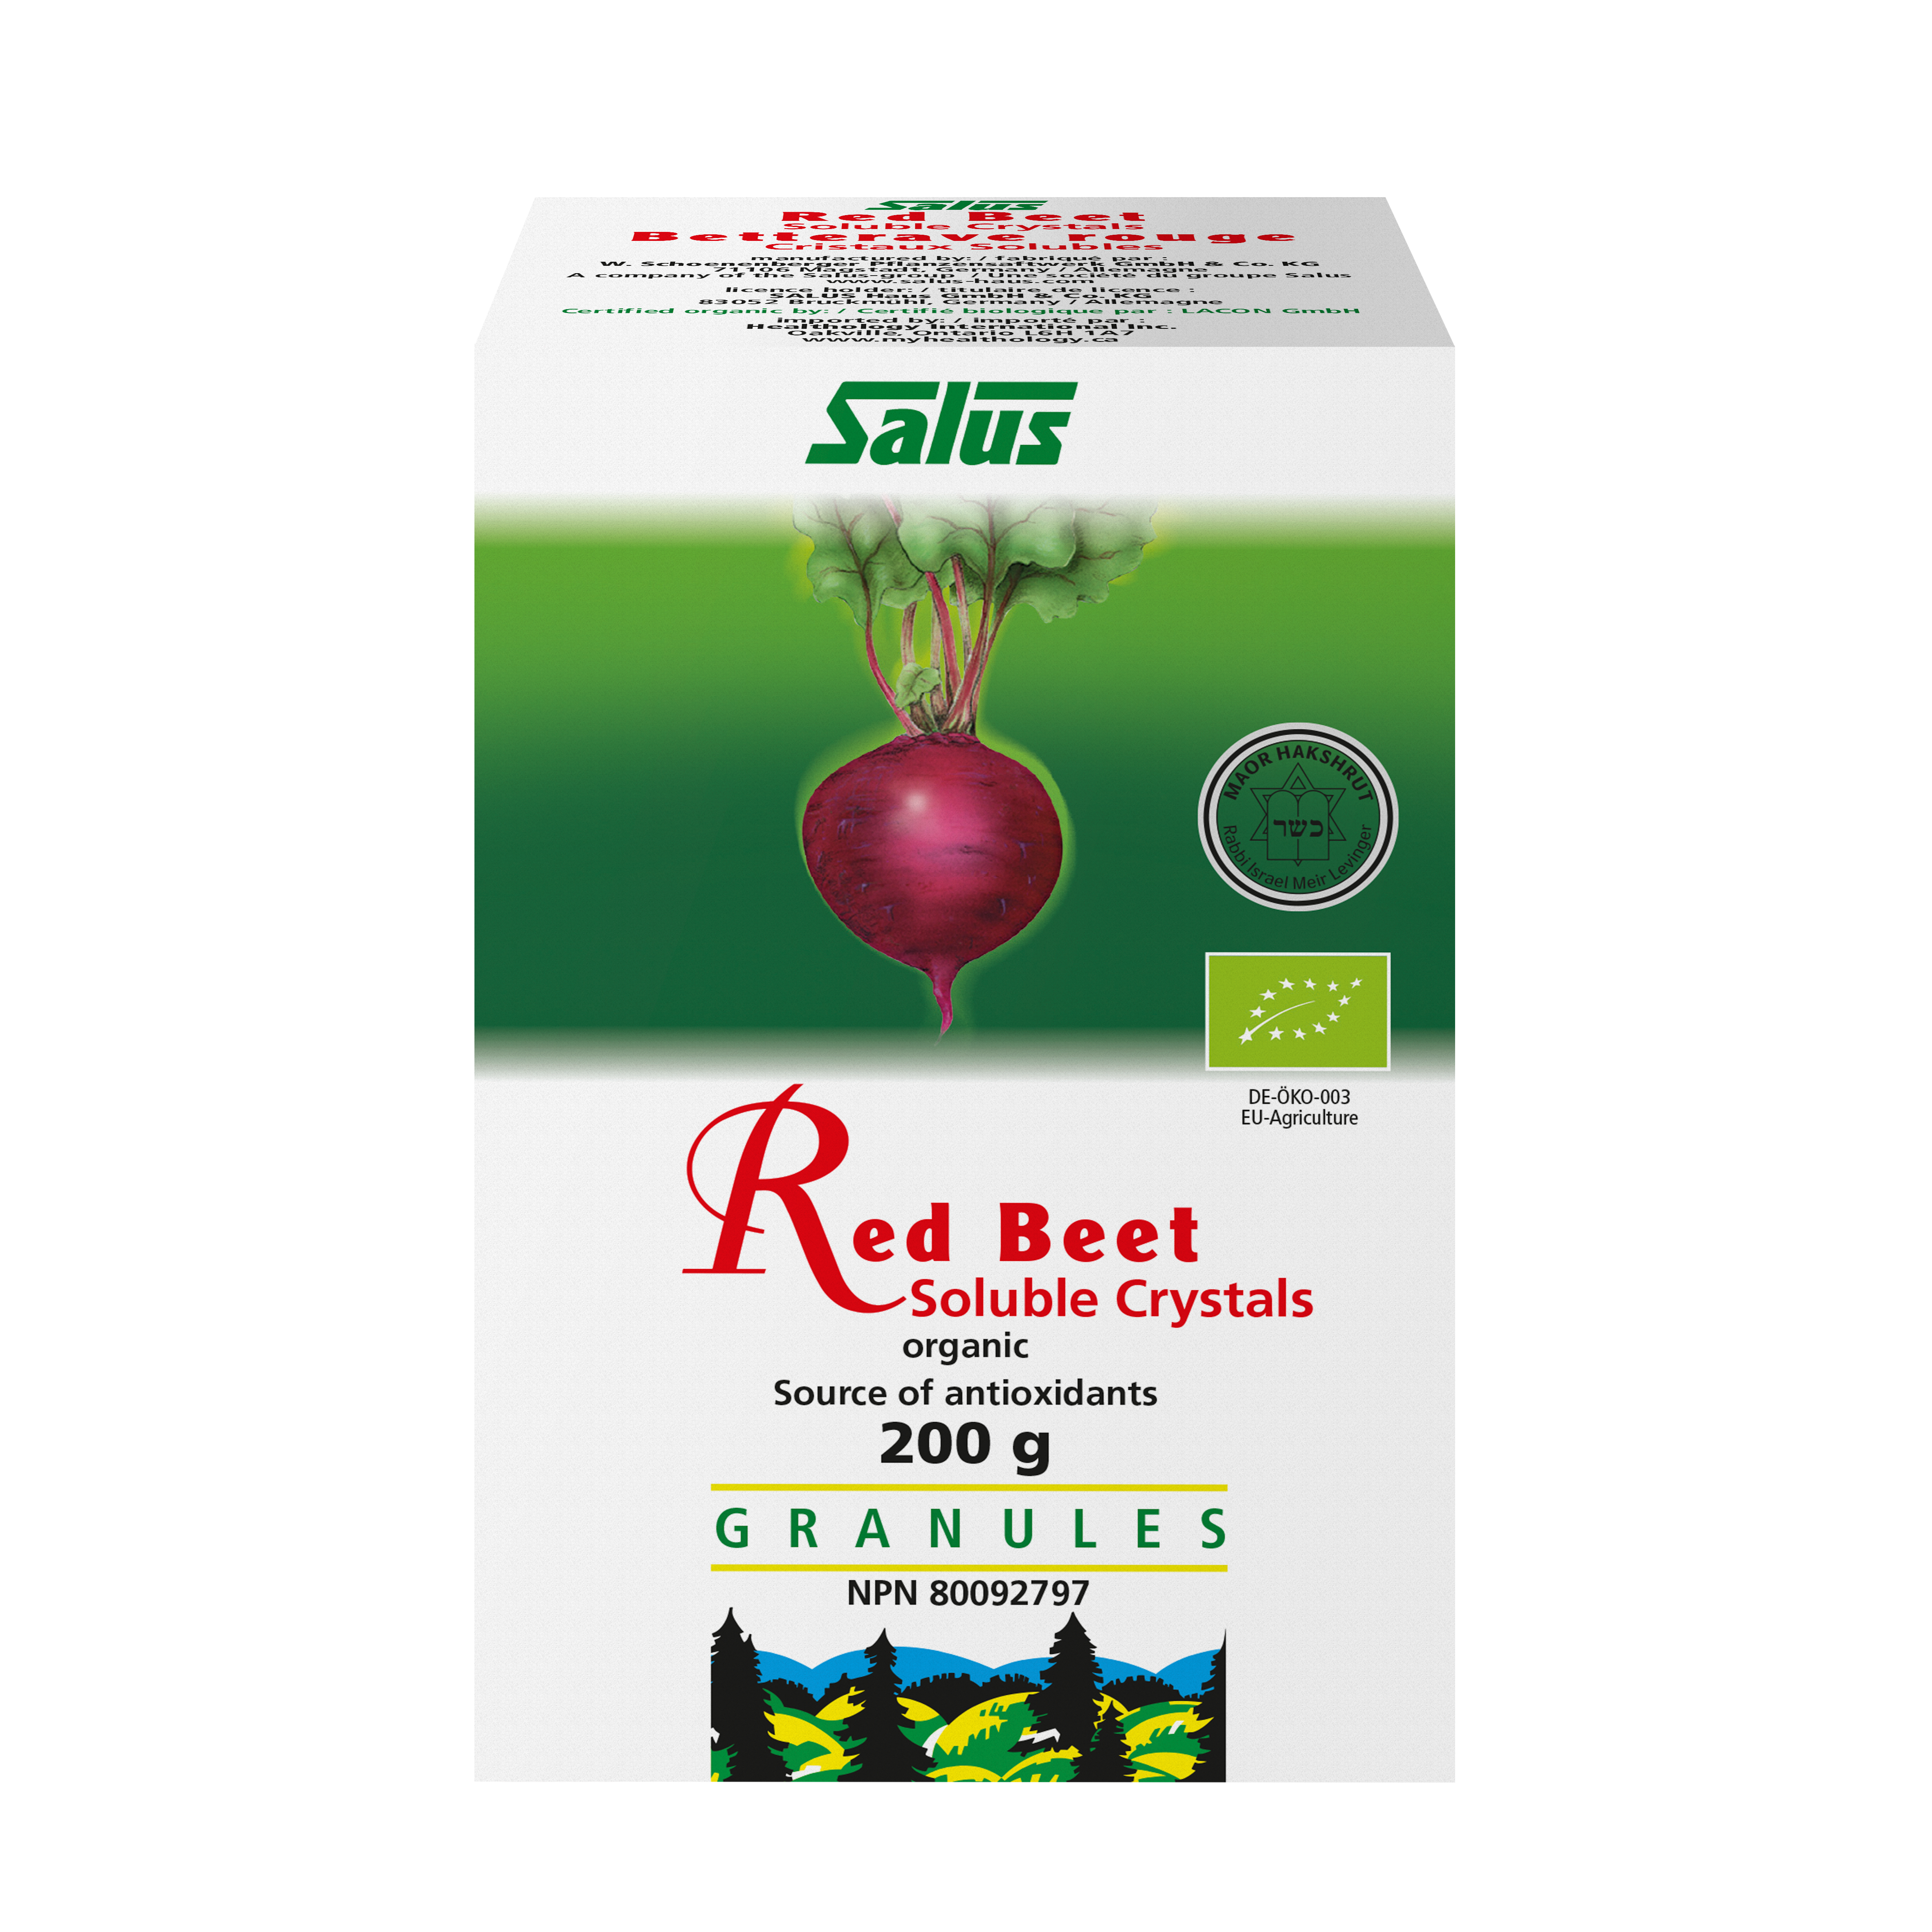 Salus Red Beet Soluble Crystals 200g